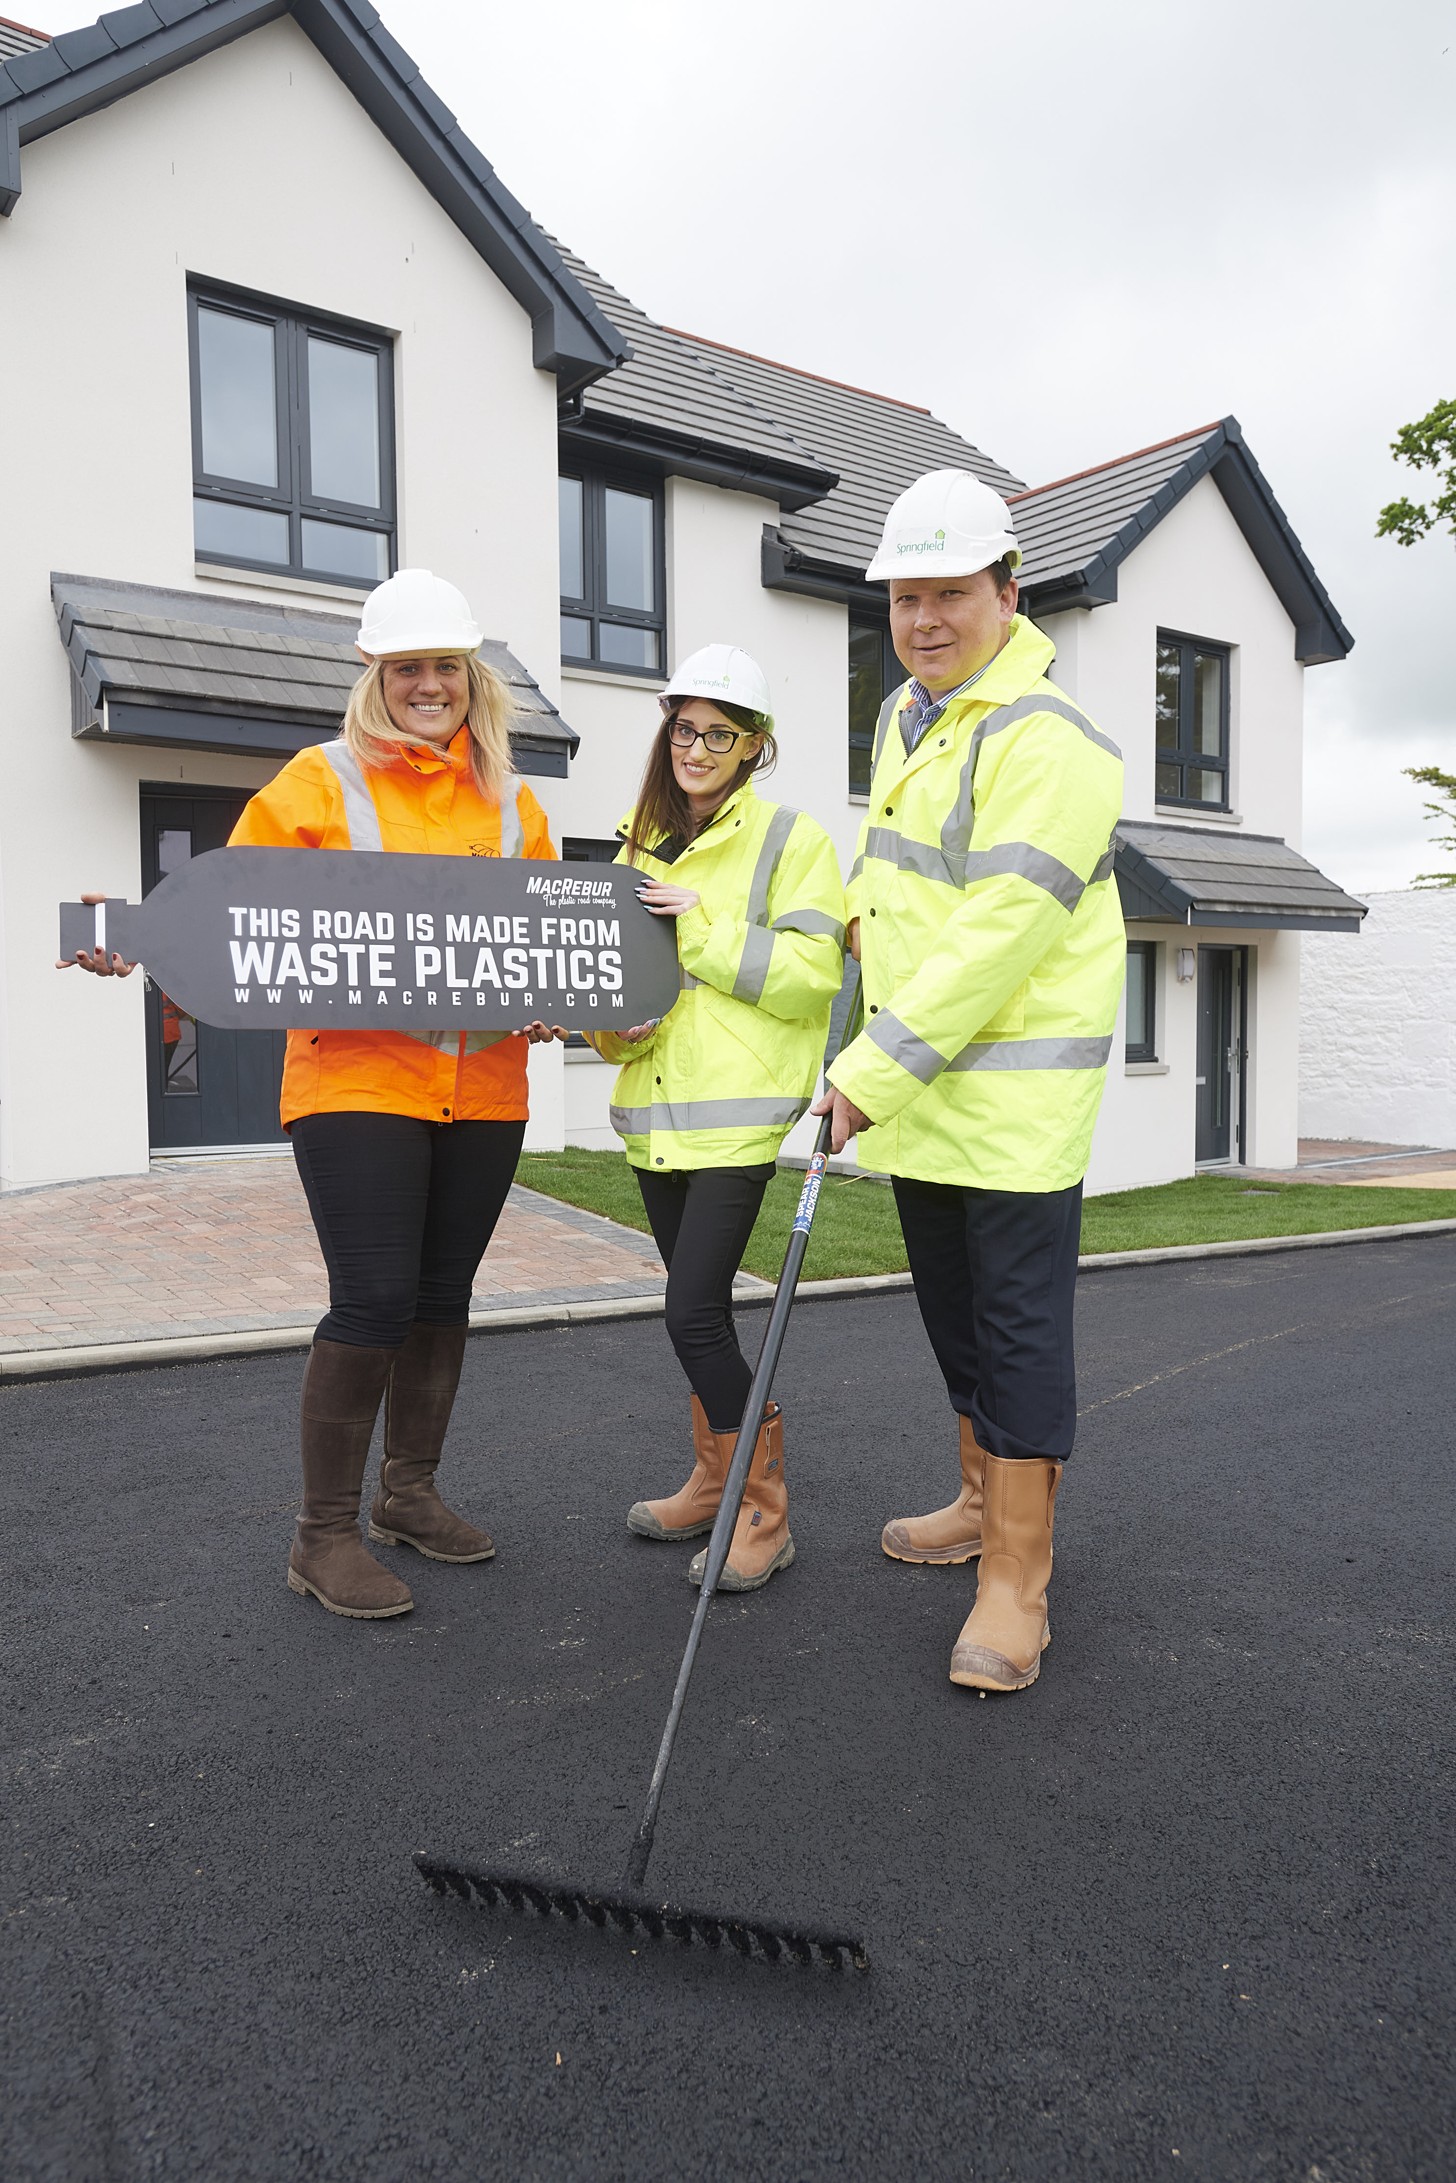 Springfield becomes first UK housebuilder to debut ‘plastic road’